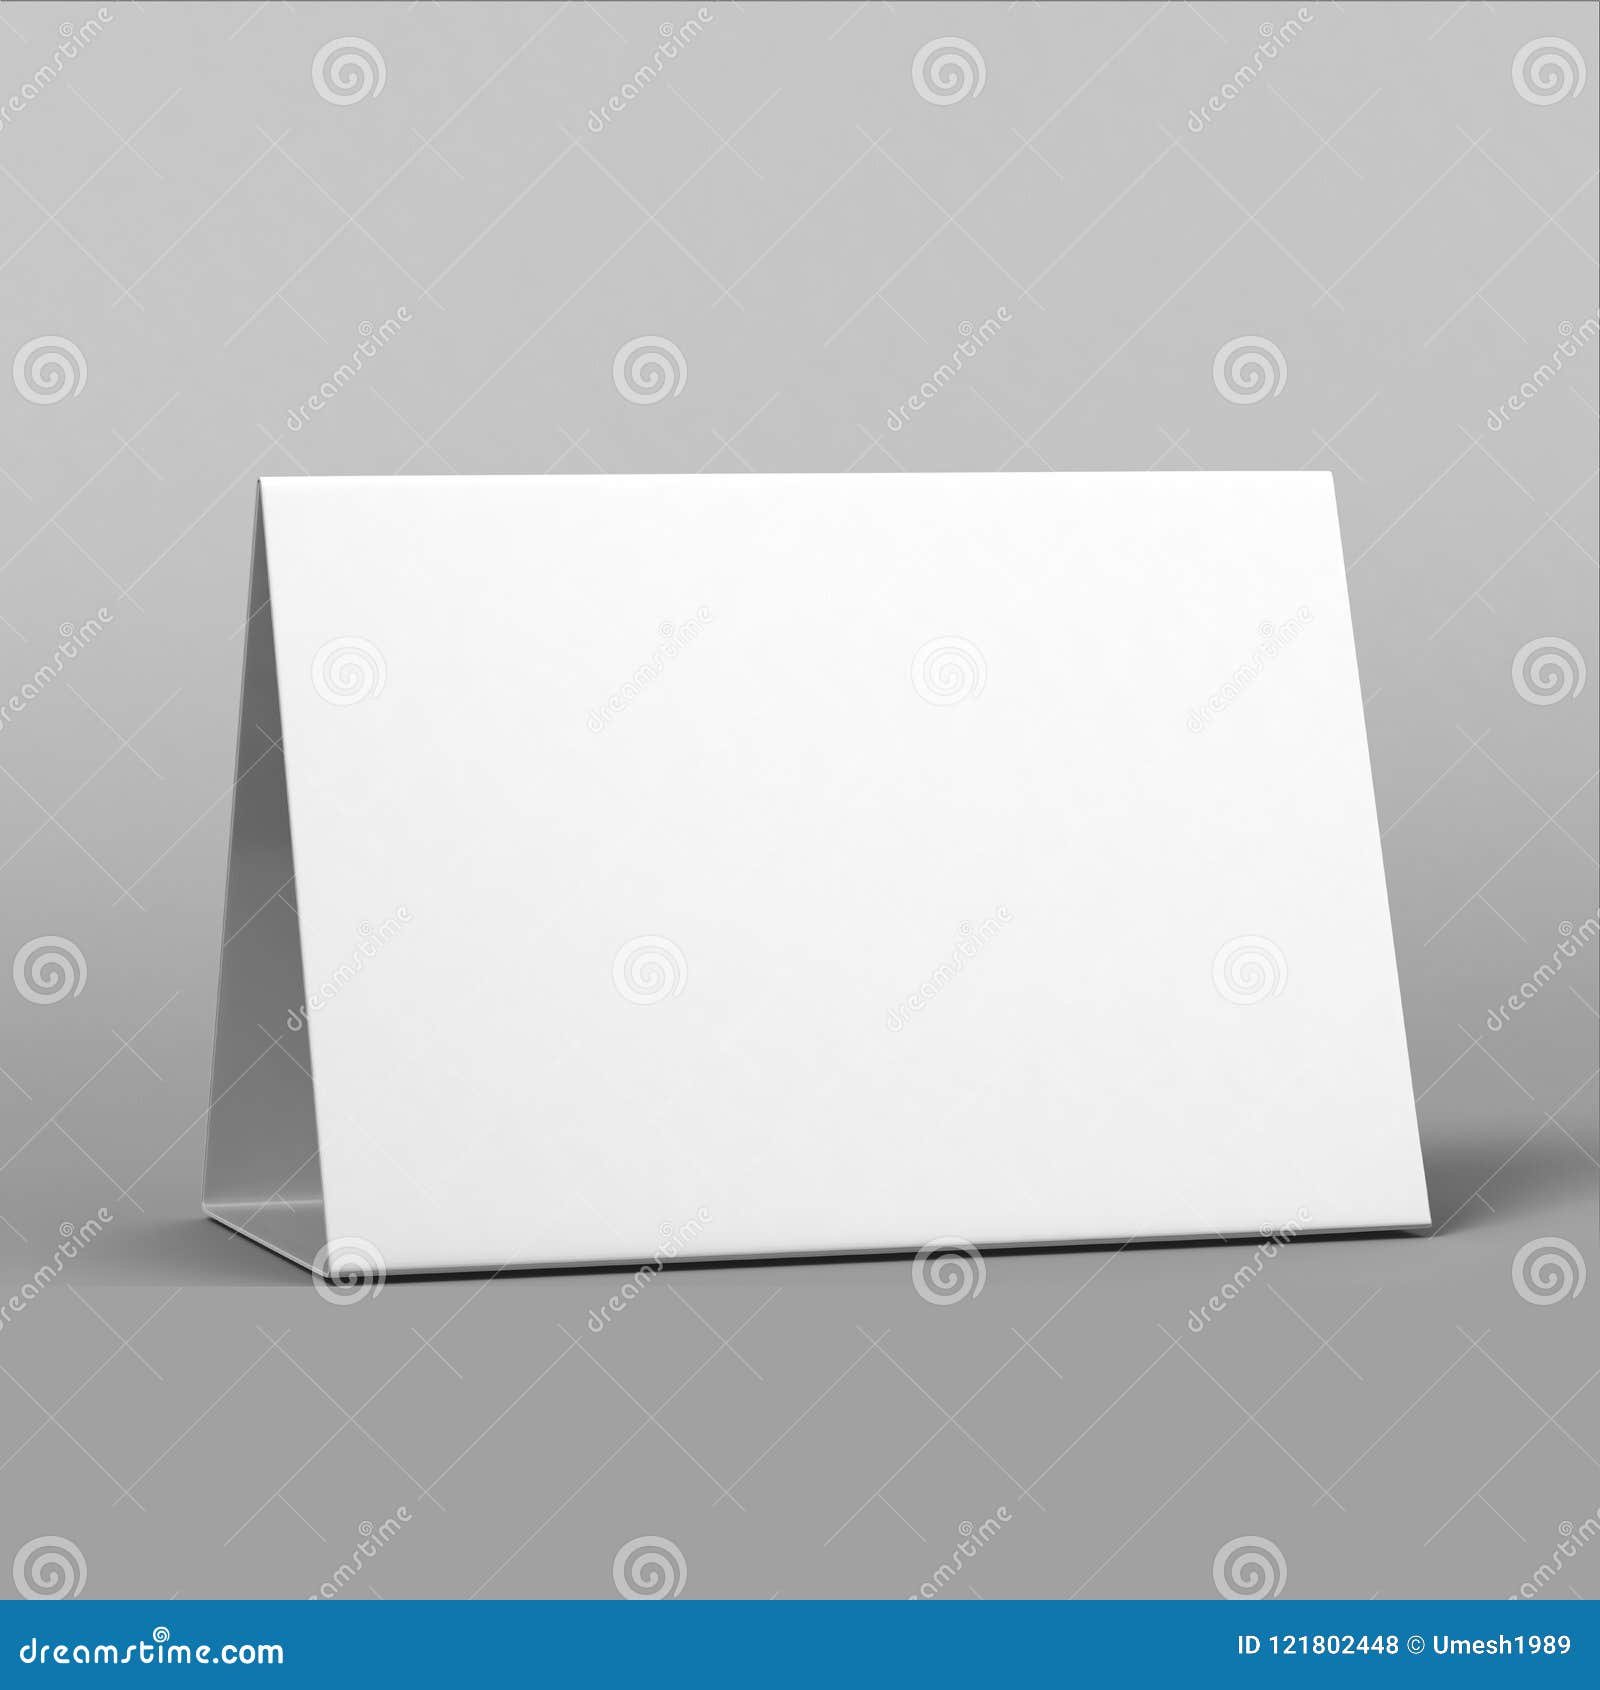 Tablet Tent Talkers Promotional Menu Cards White Blank Empty for With Blank Tent Card Template